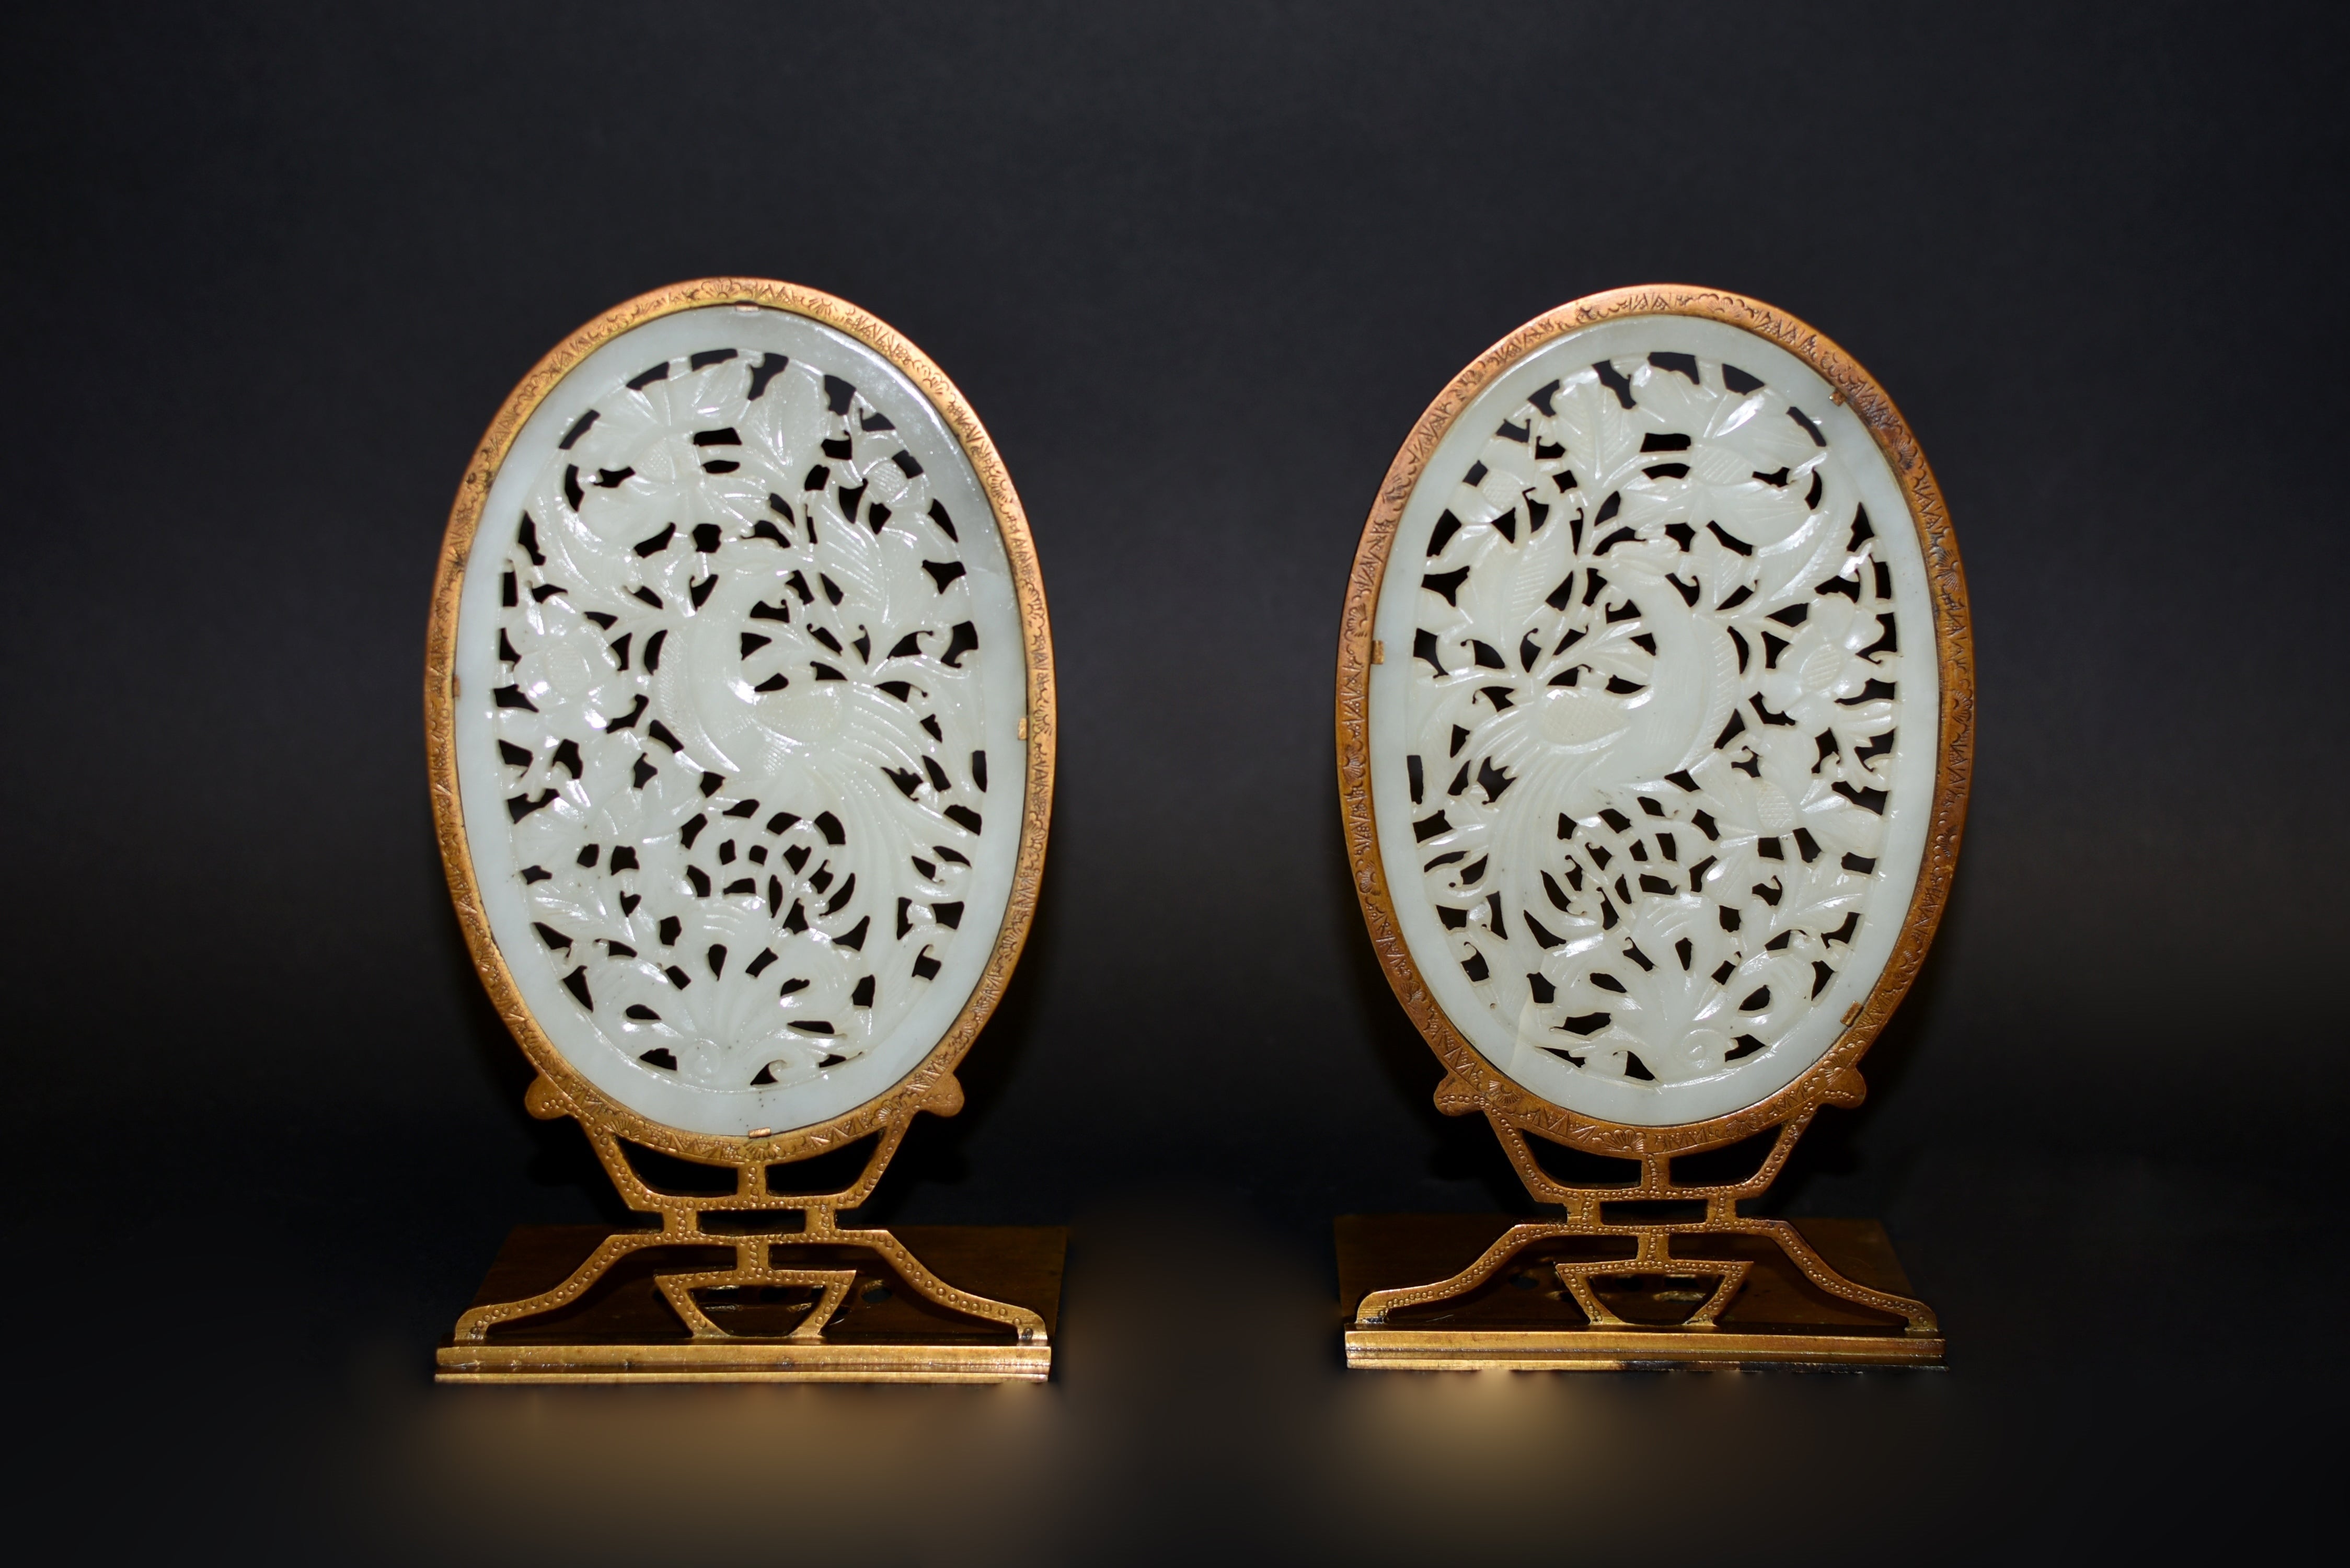 A pair of extraordinary bookends with large oval he-tian white nephrite jade insets. In the form of ovoid, the 4